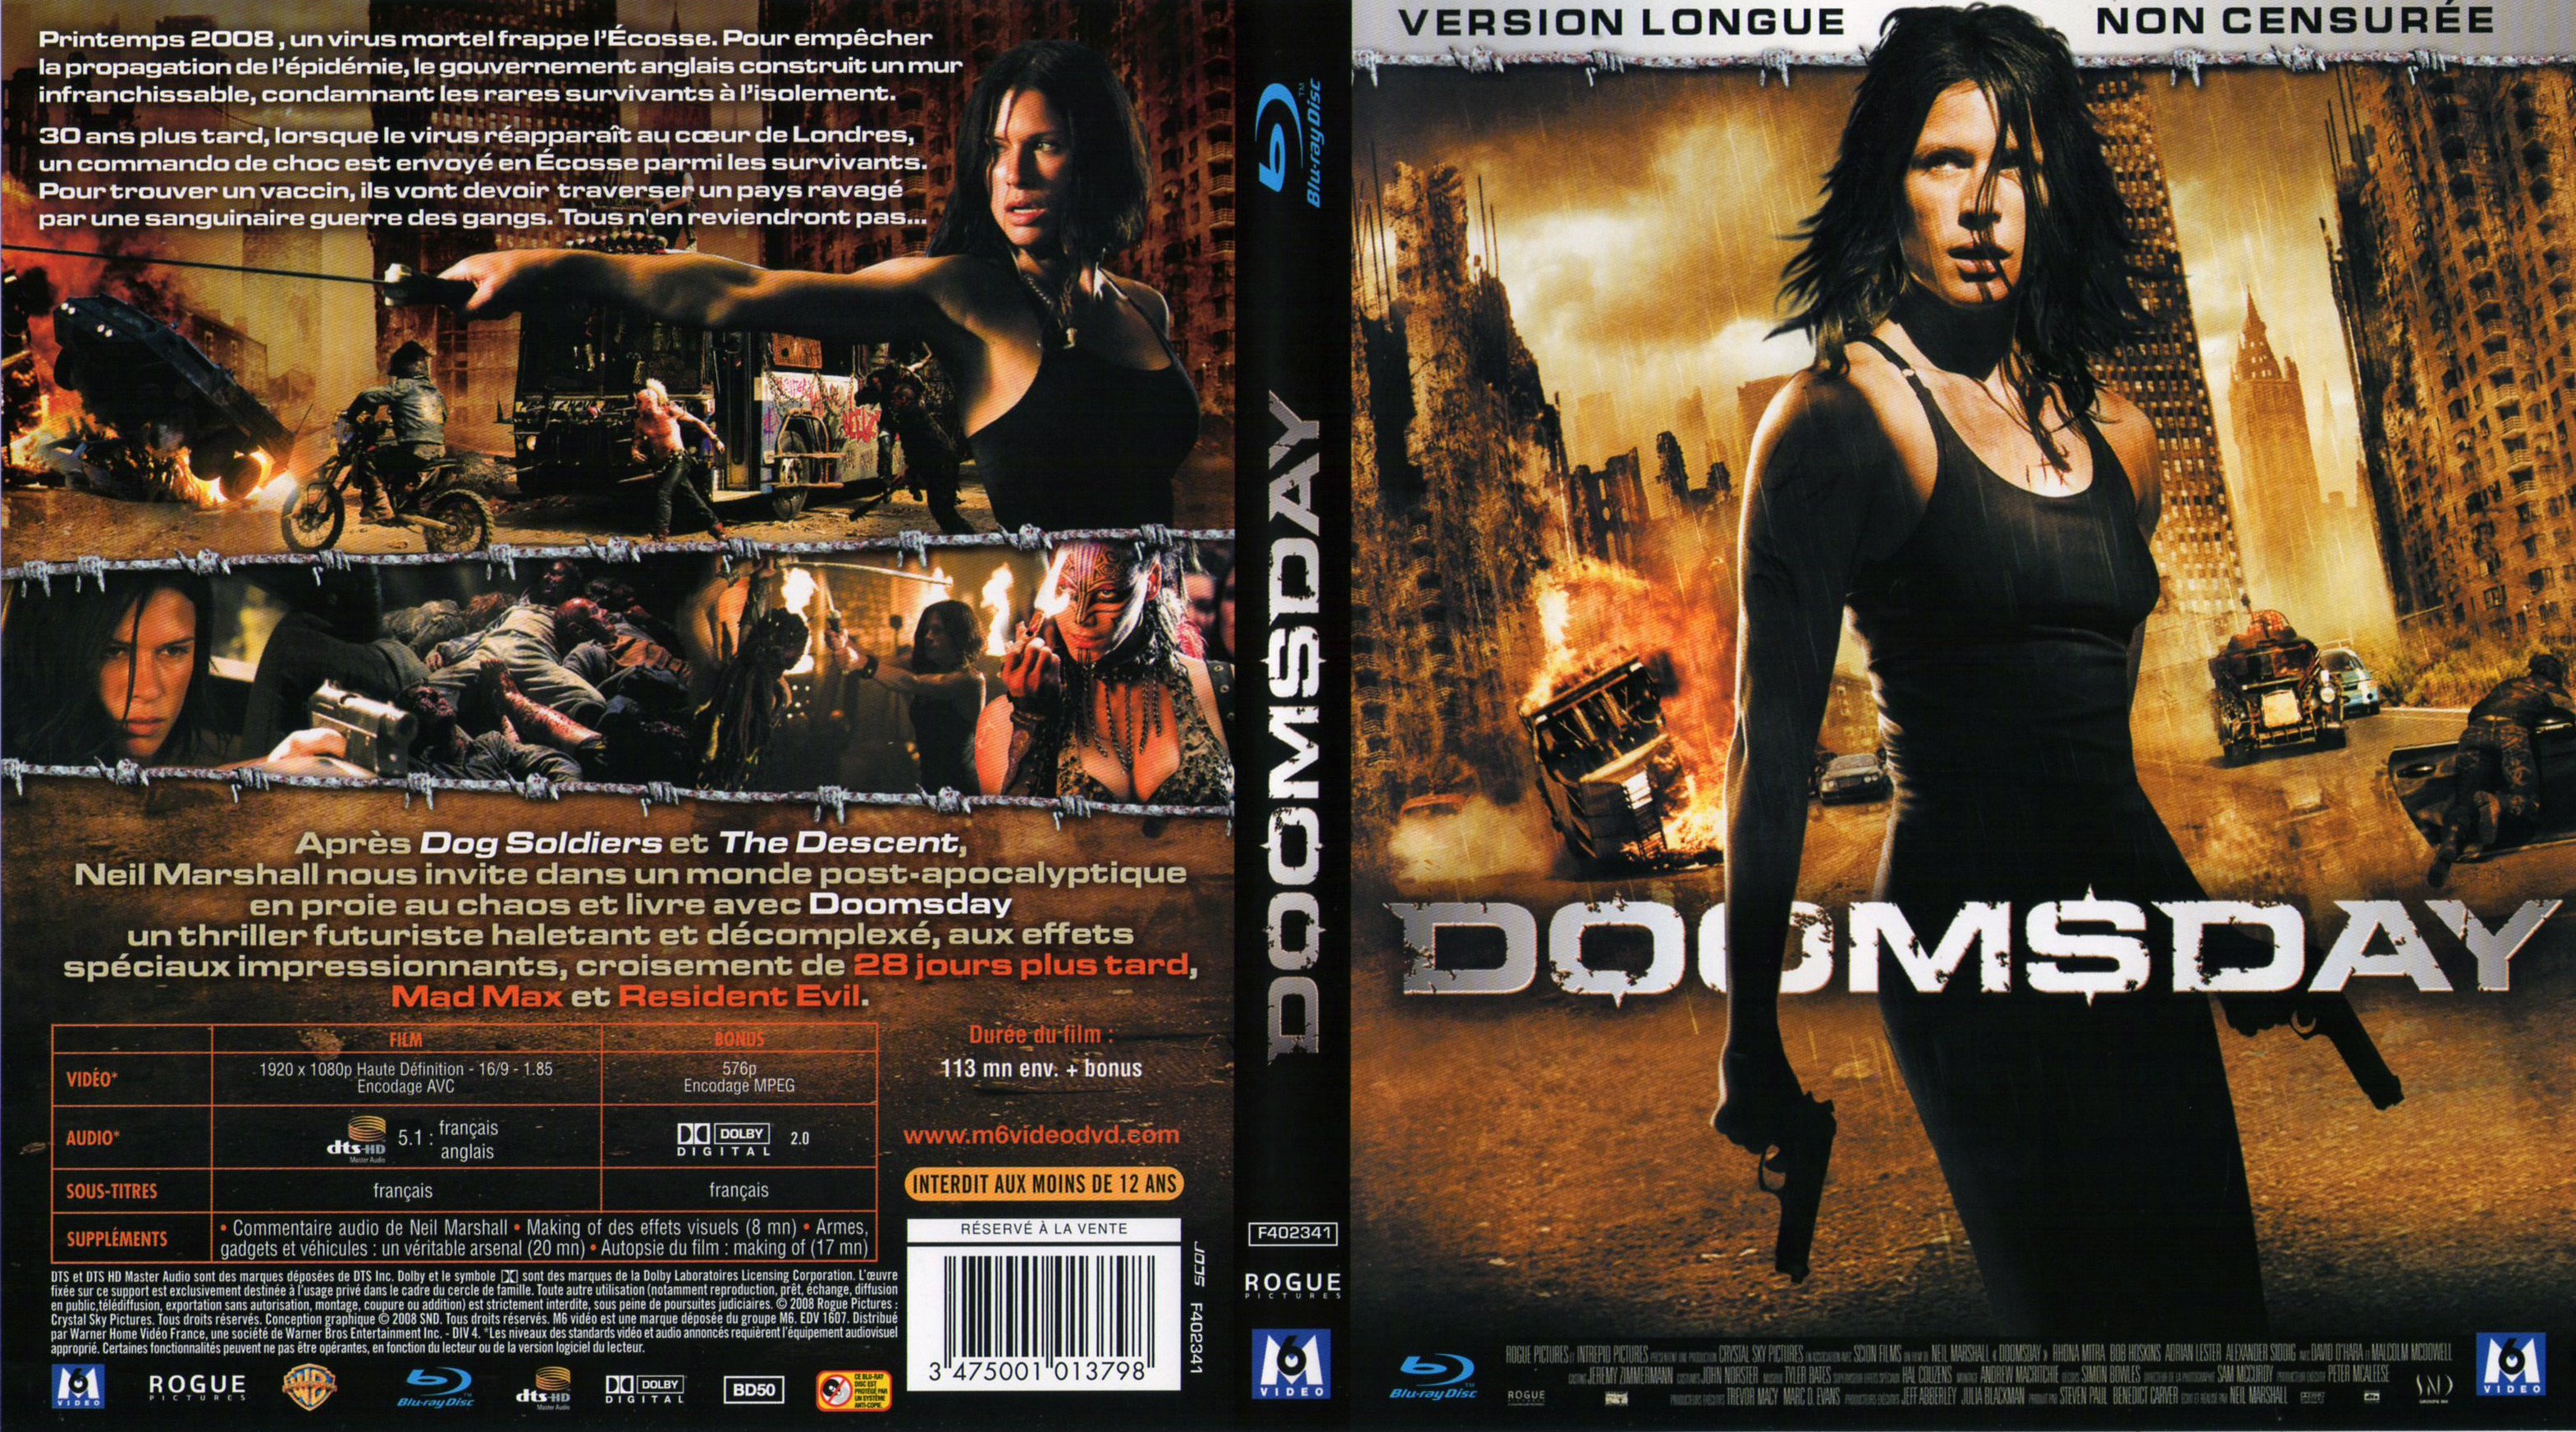 Jaquette DVD Doomsday (BLU-RAY)